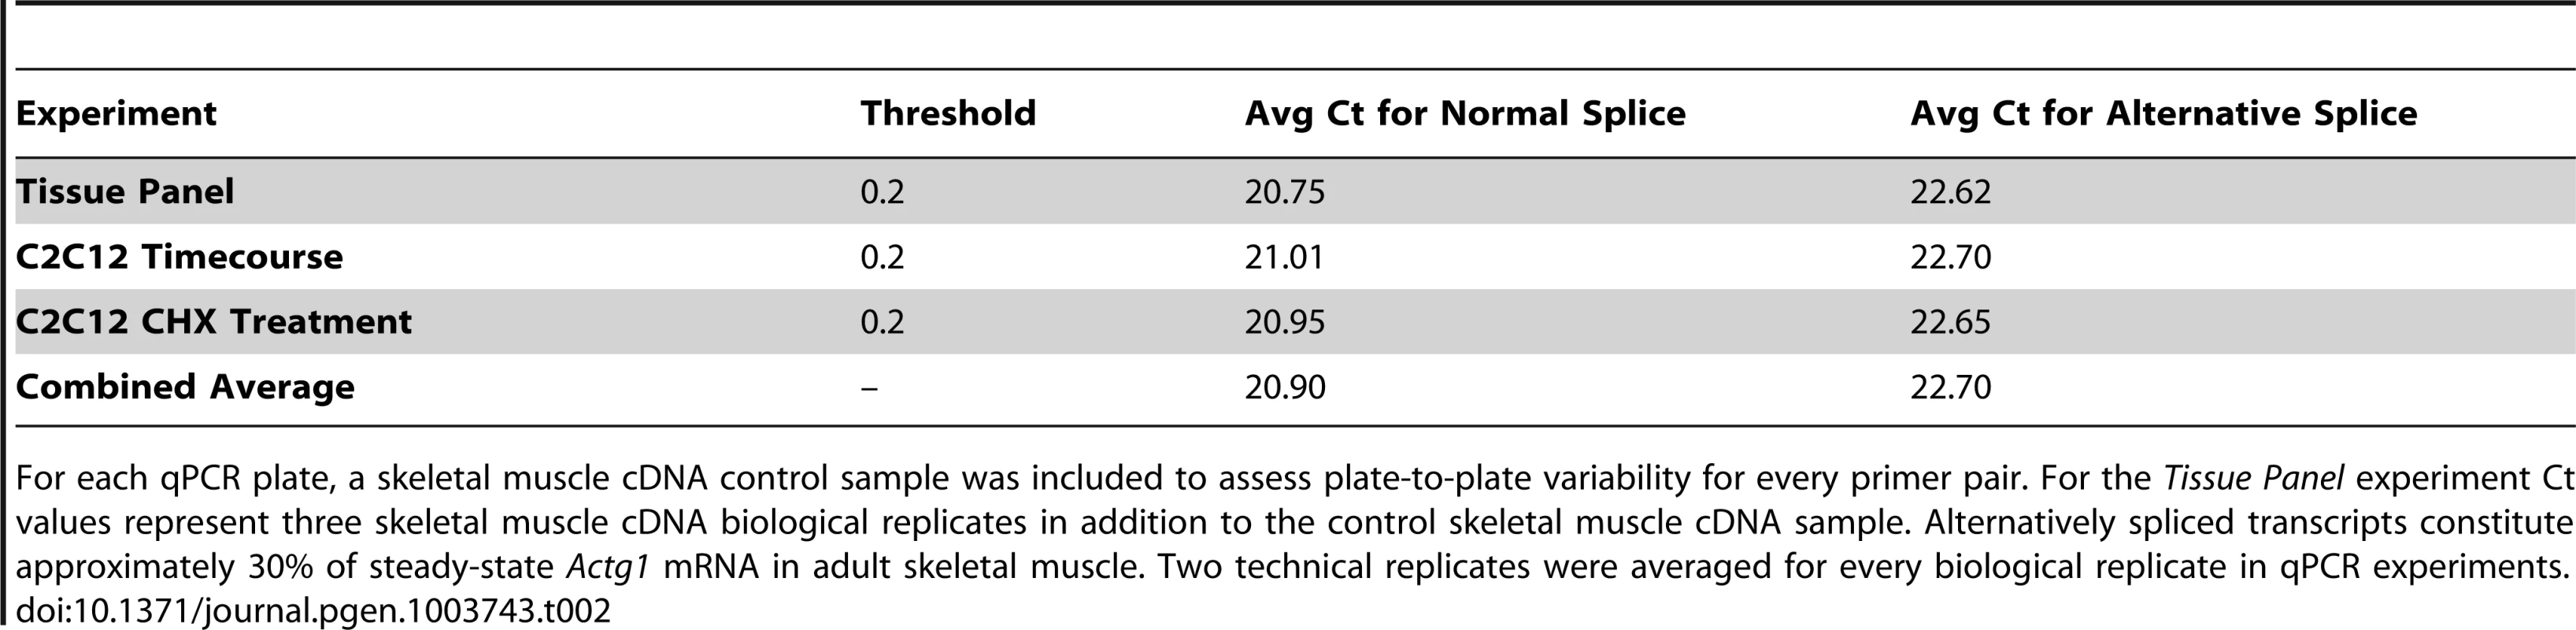 Ct values for a skeletal muscle cDNA control demonstrate no plate-to-plate variability.